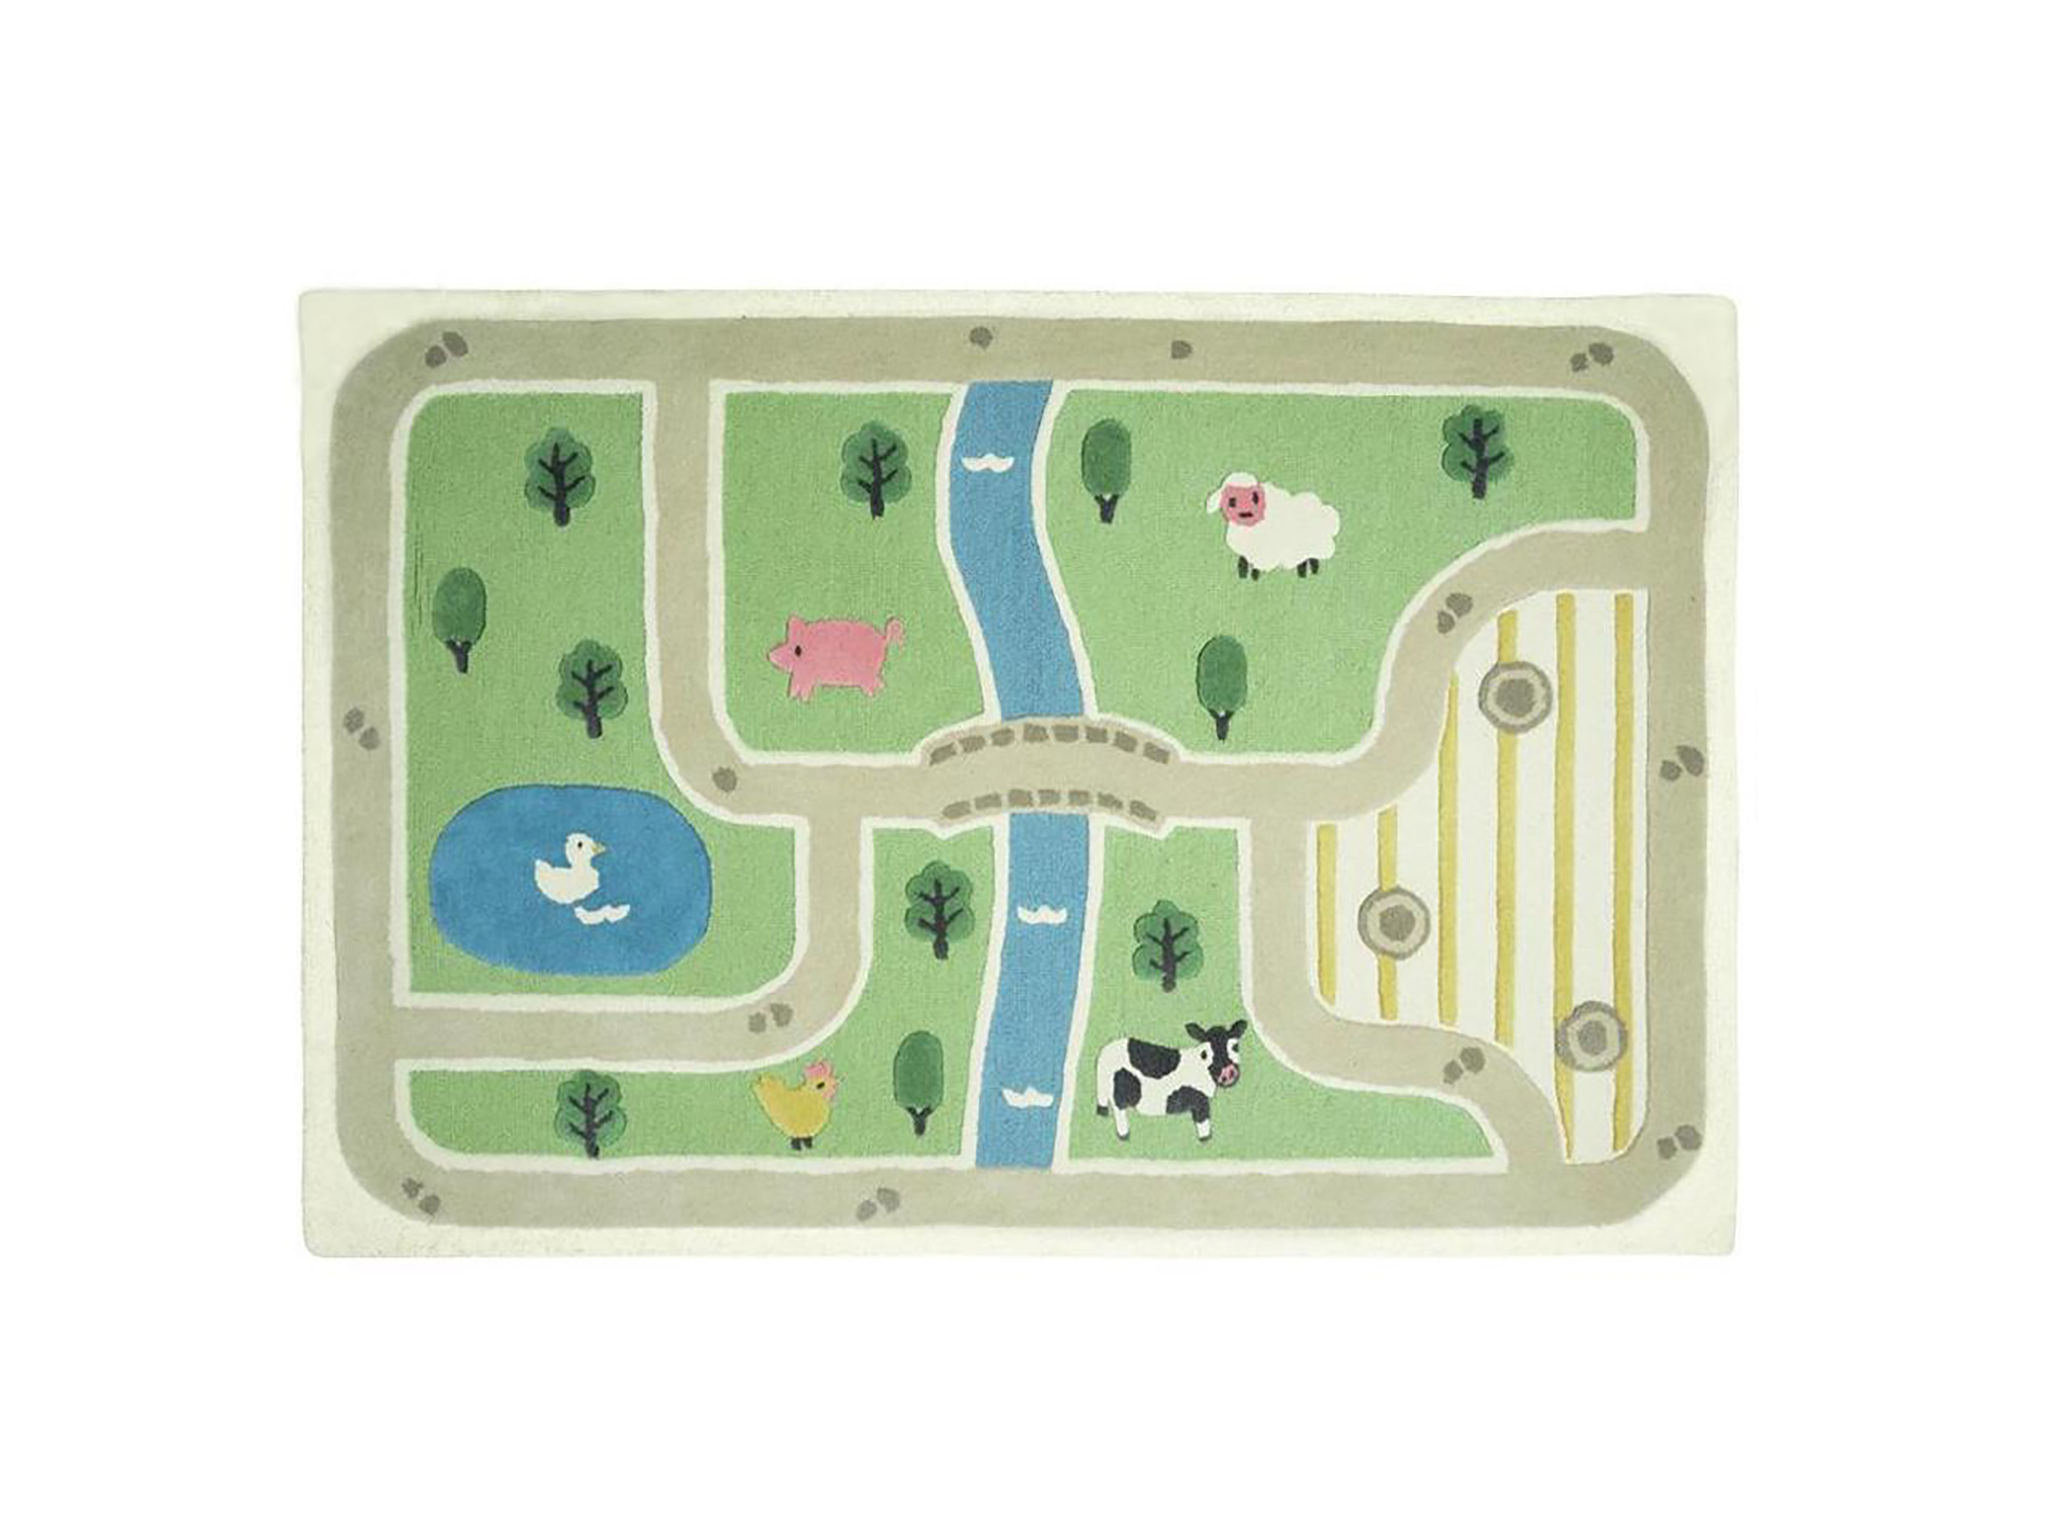 Day at the Farm Rug, Large, ┬ú185, GLTC.jpeg.png